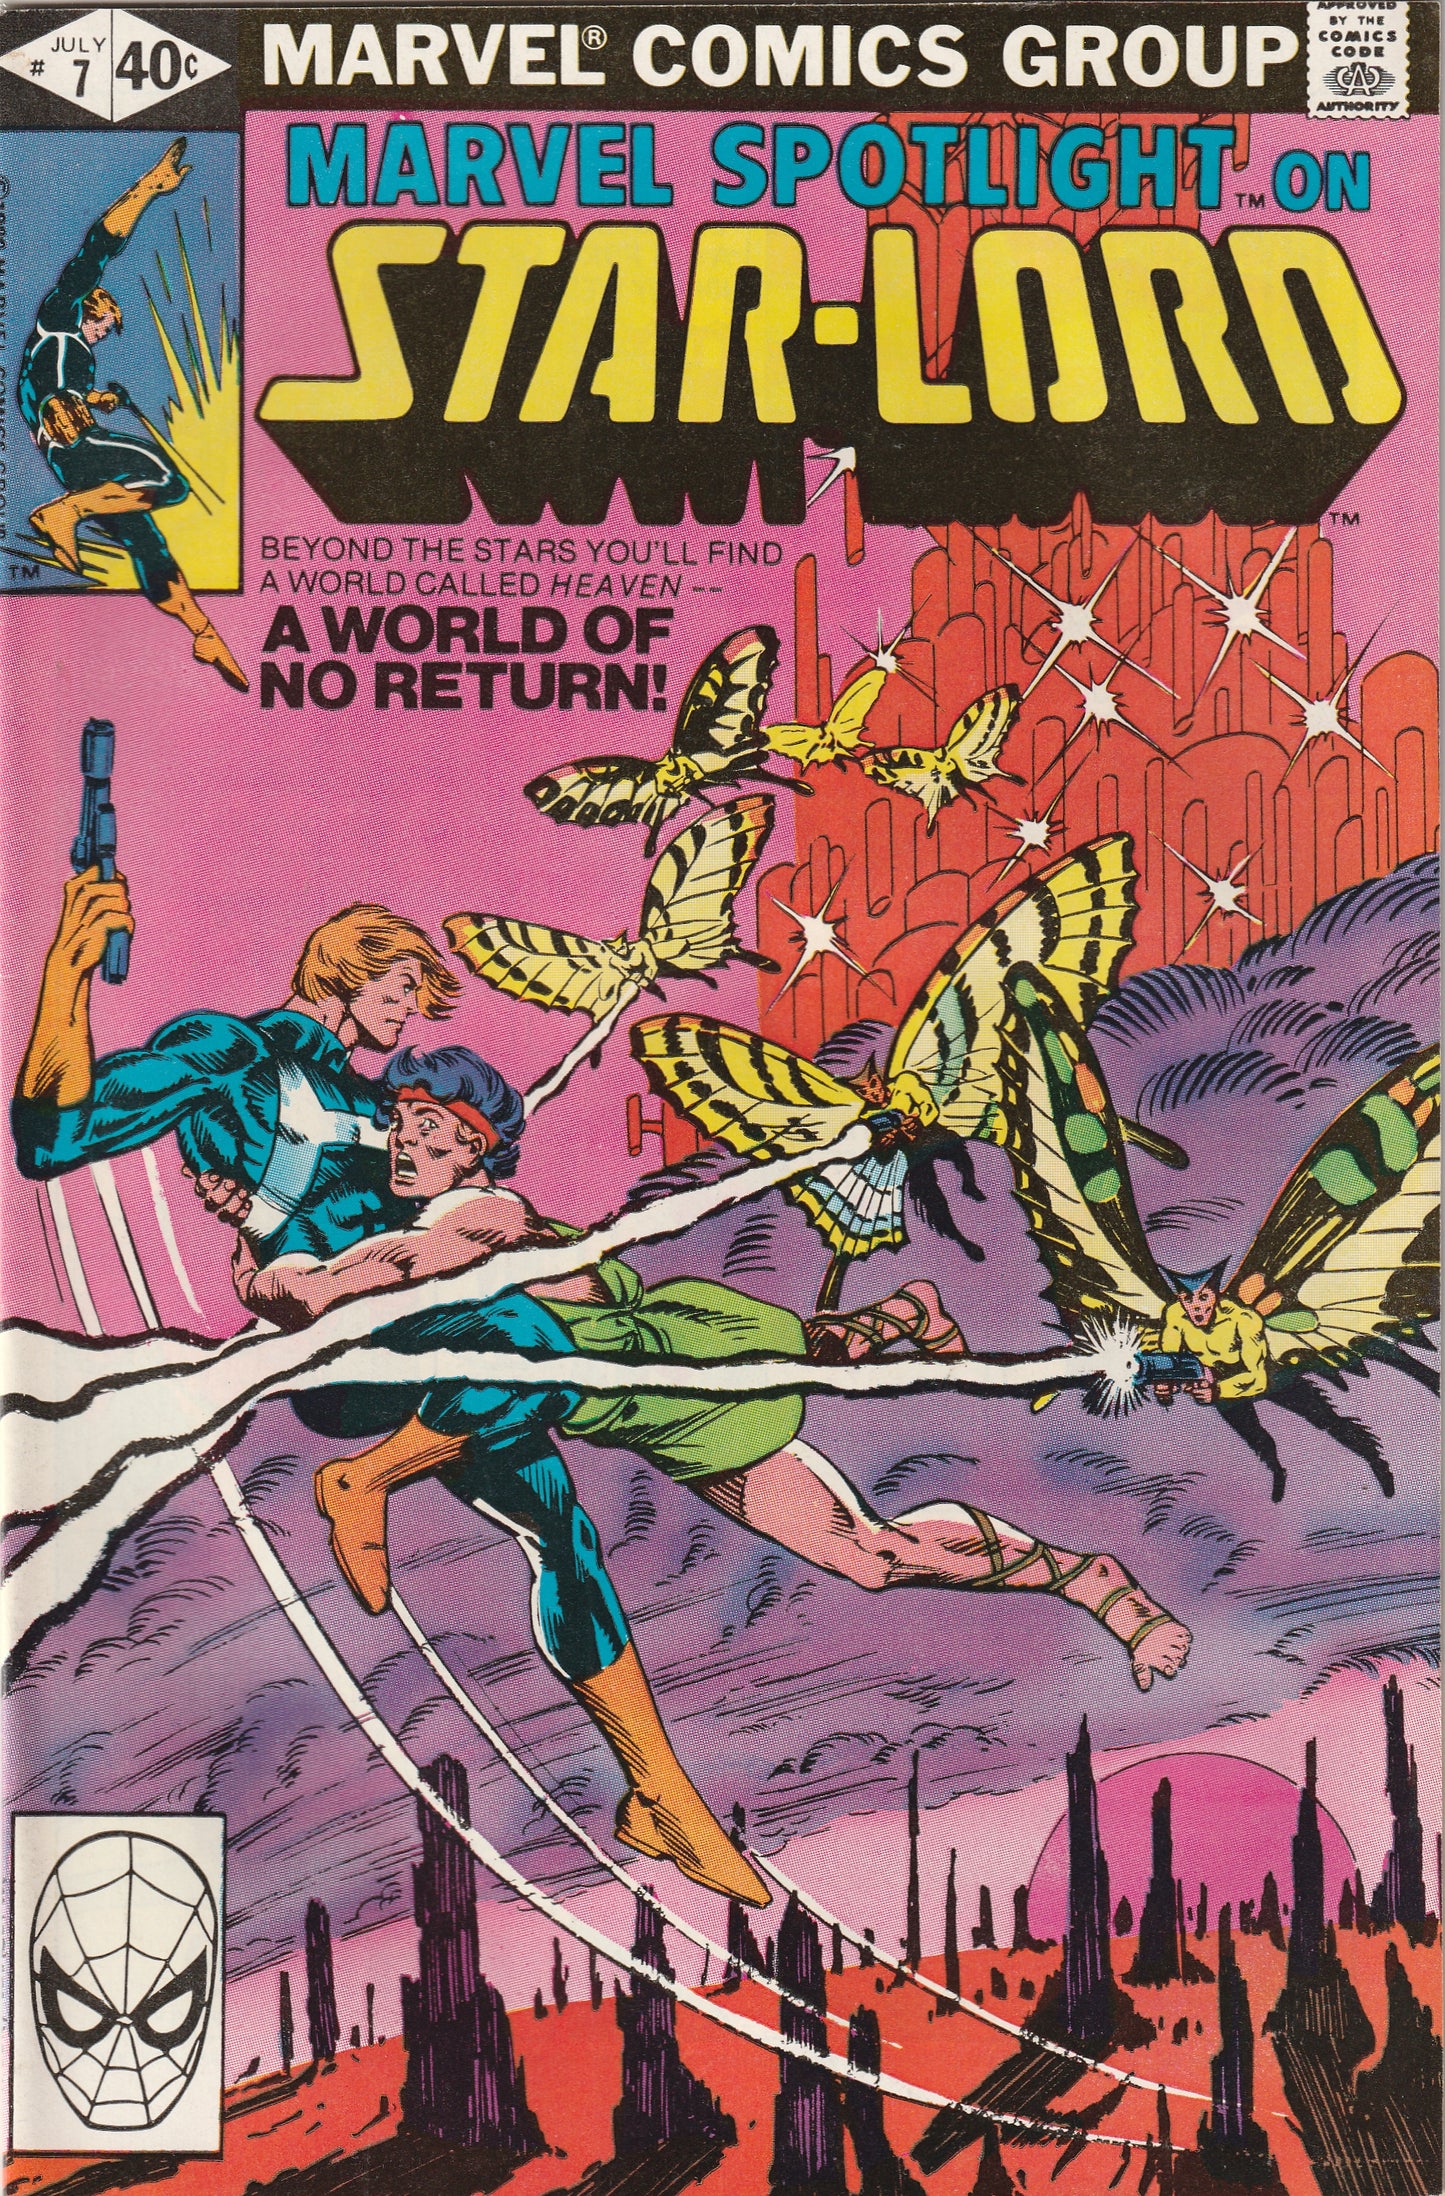 Marvel Spotlight Volume 2 #7 (1980) Star-Lord - 2nd comic book appearance of Star-Lord